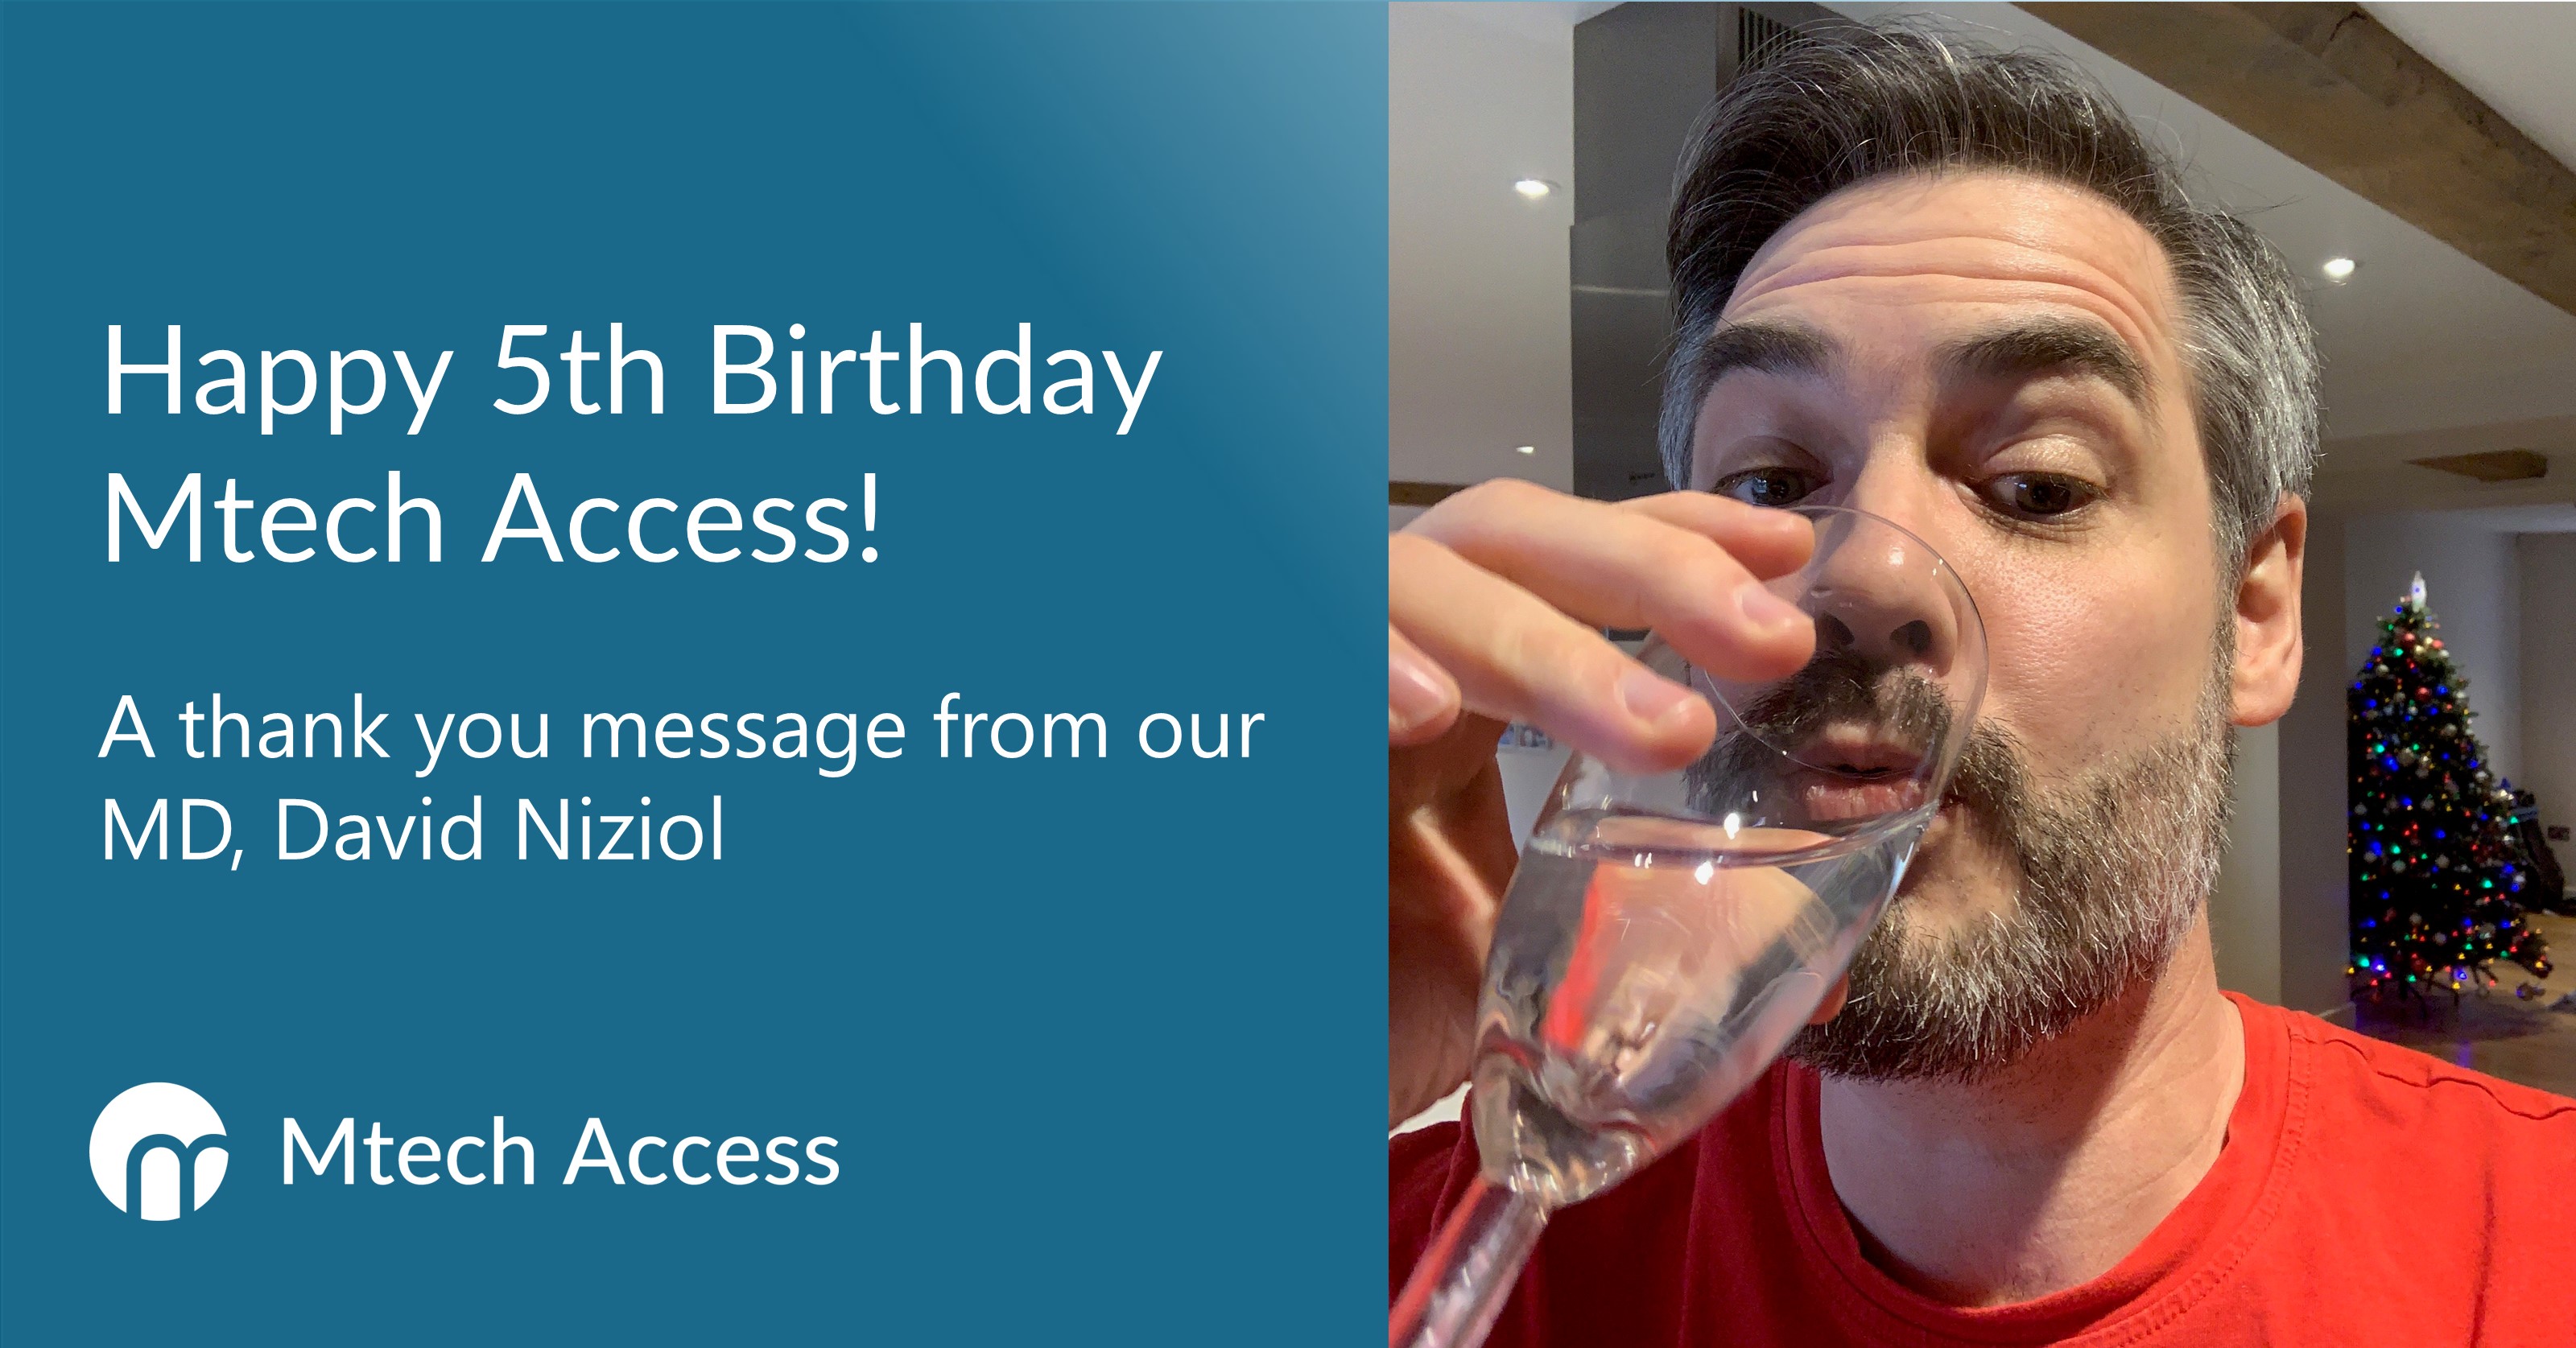 Happy 5th Birthday Mtech Access! A thank you message from our MD, David Niziol